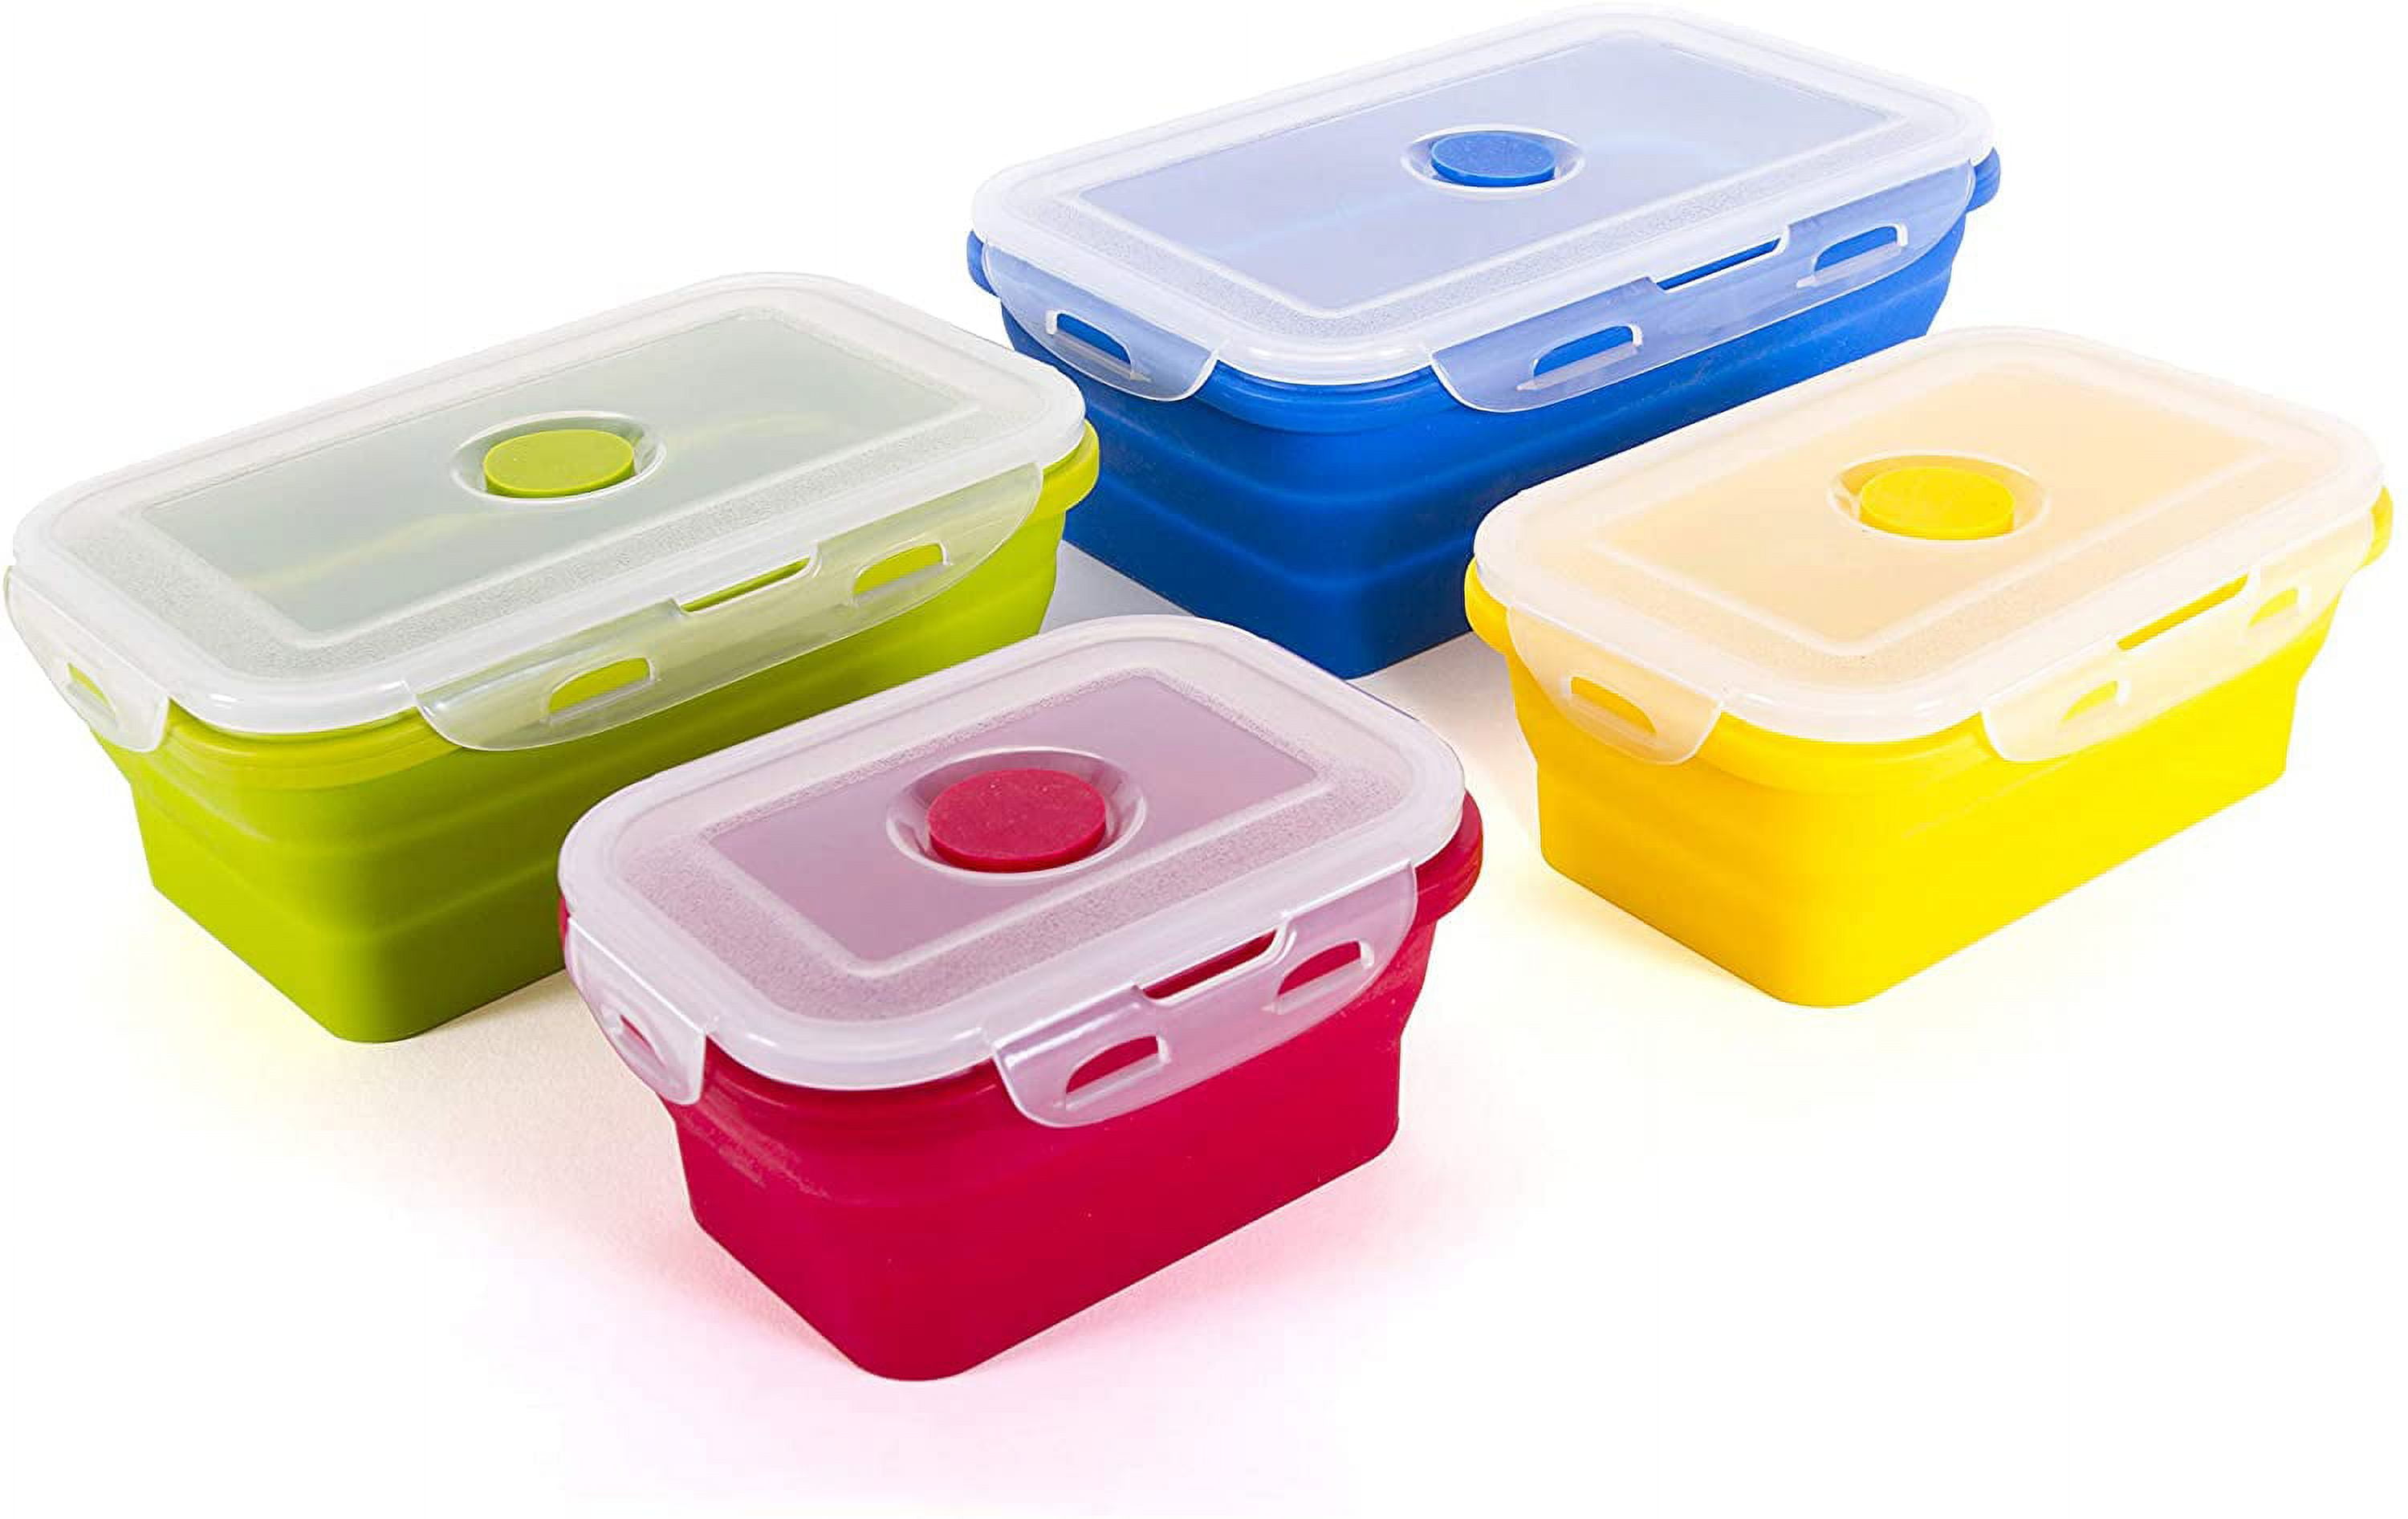 CARTINTS Silicone Collapsible Food Storage Containers-Prep/Storage Bowls with Lids – Set of 4 Round Silicone Lunch Containers –